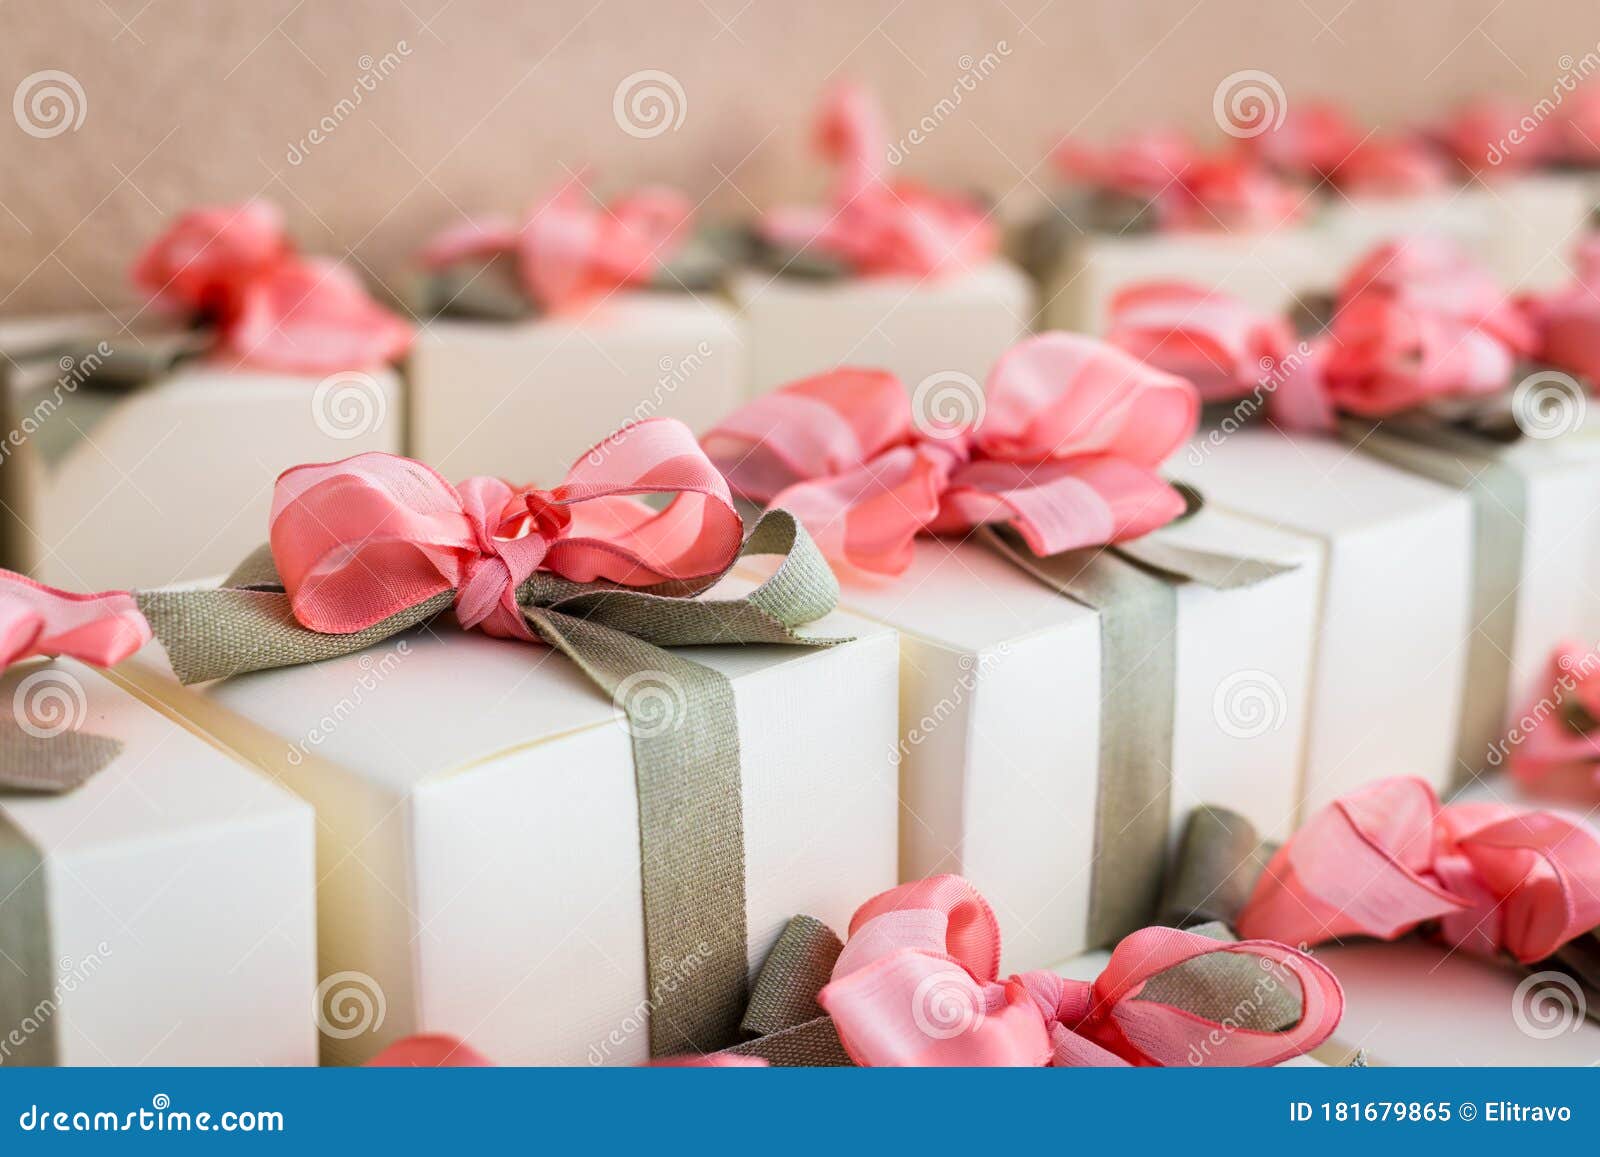 wedding favors for wedding guest